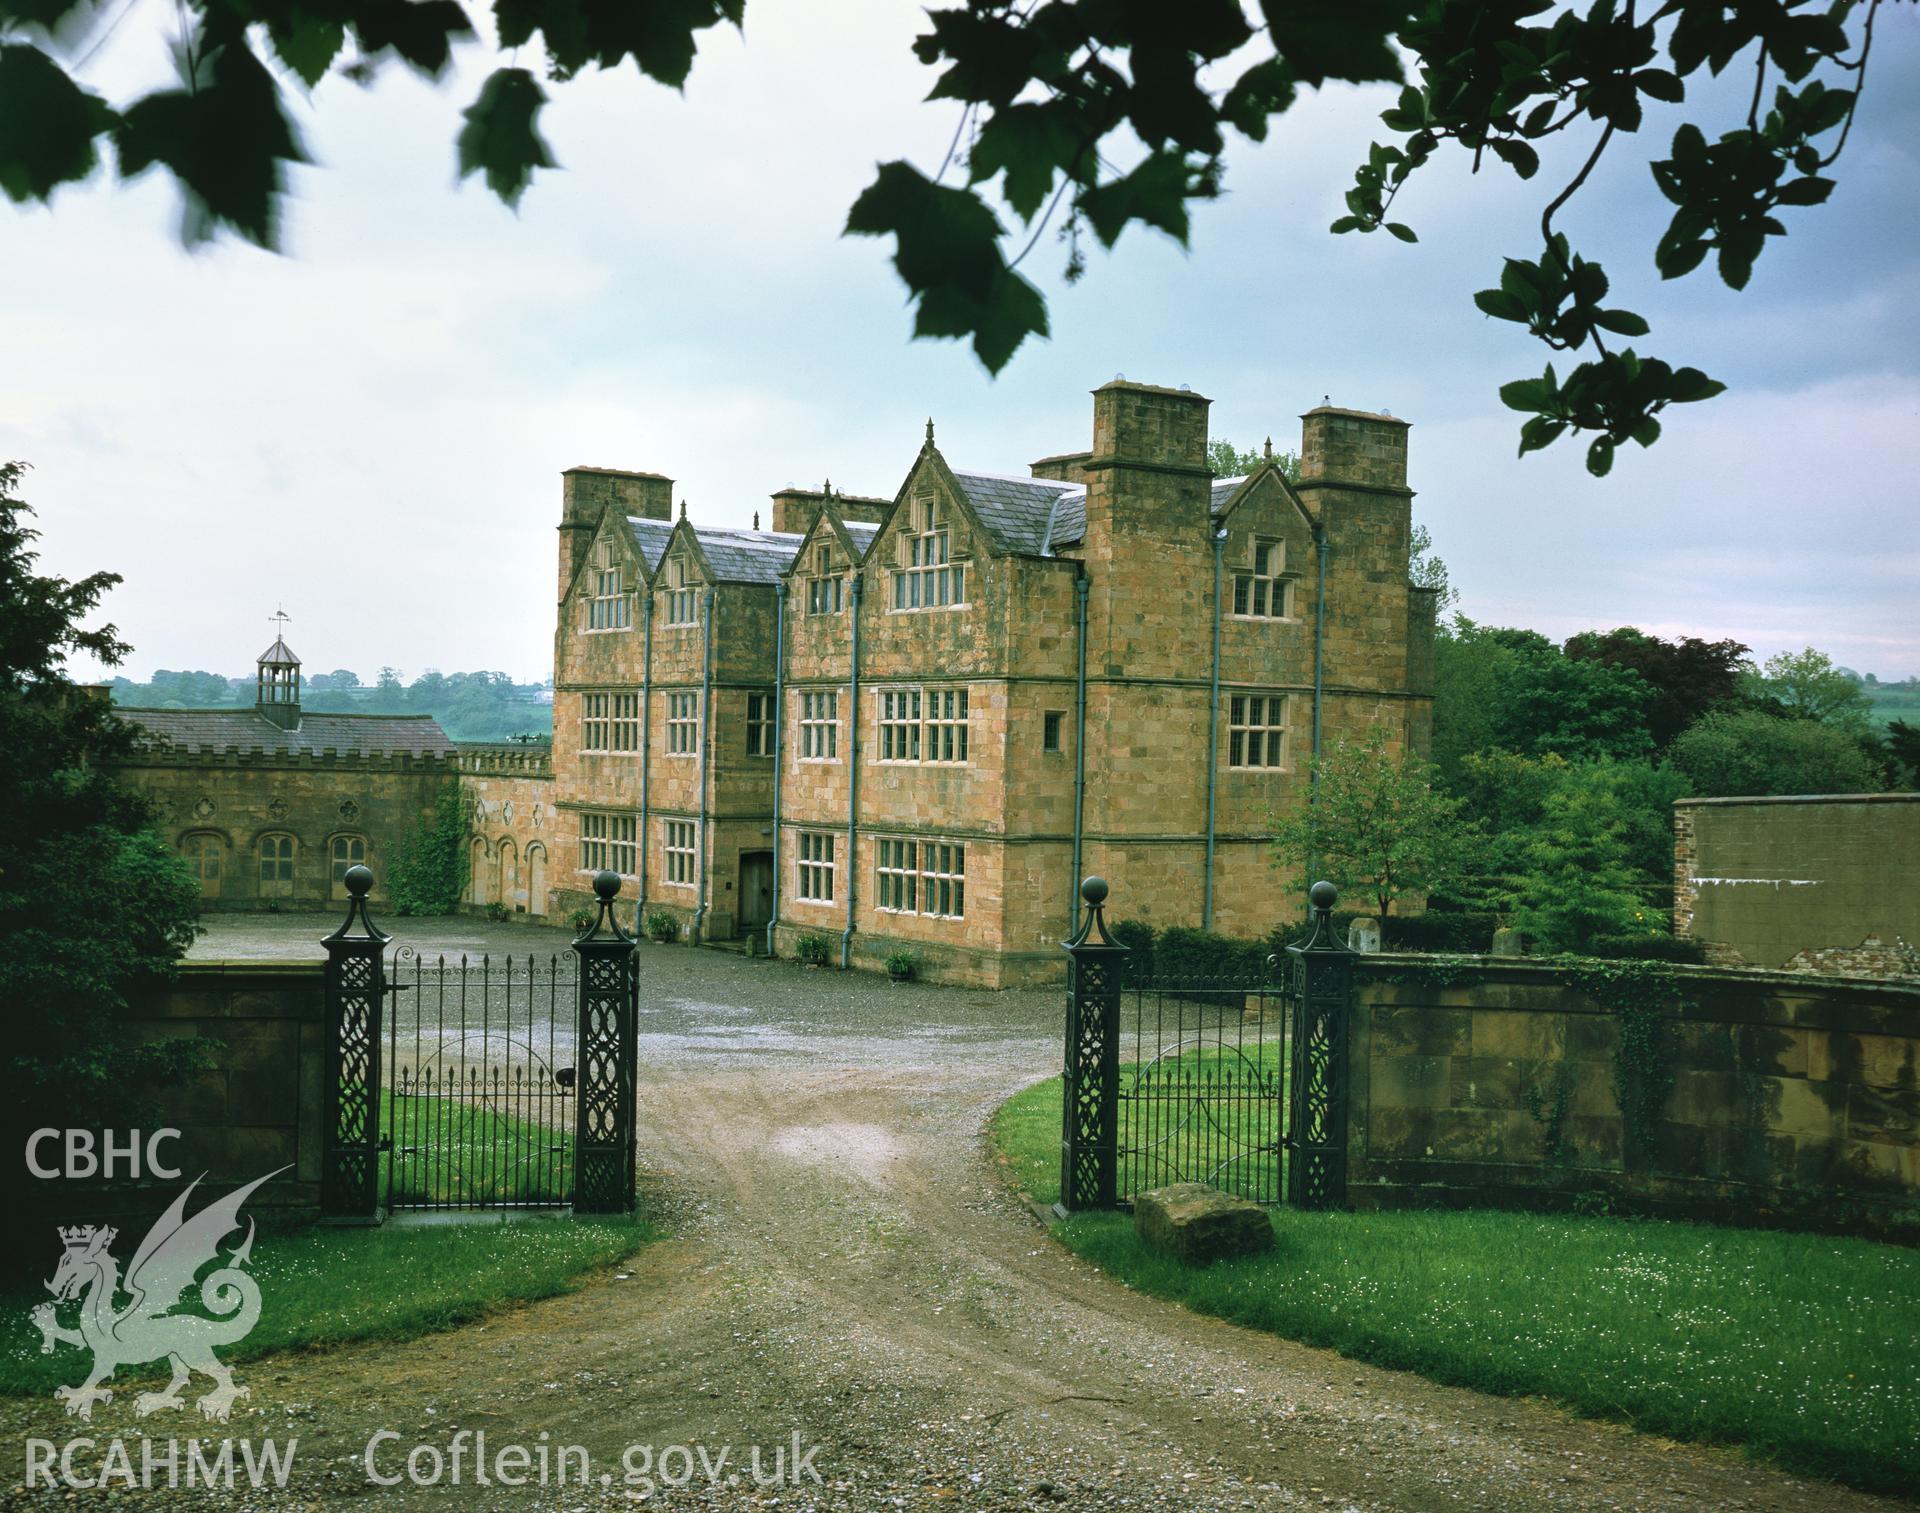 Colour transparency showing view of Nercwys Hall